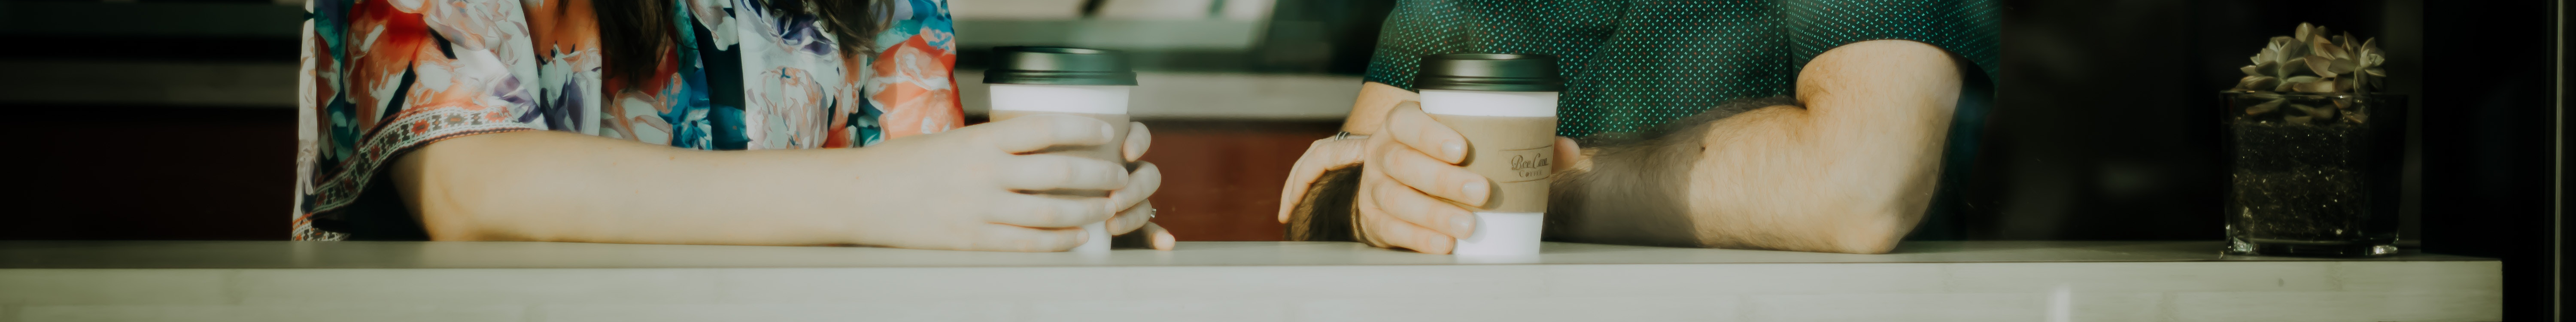 Banner image showing two people talking whilst drinking coffee.